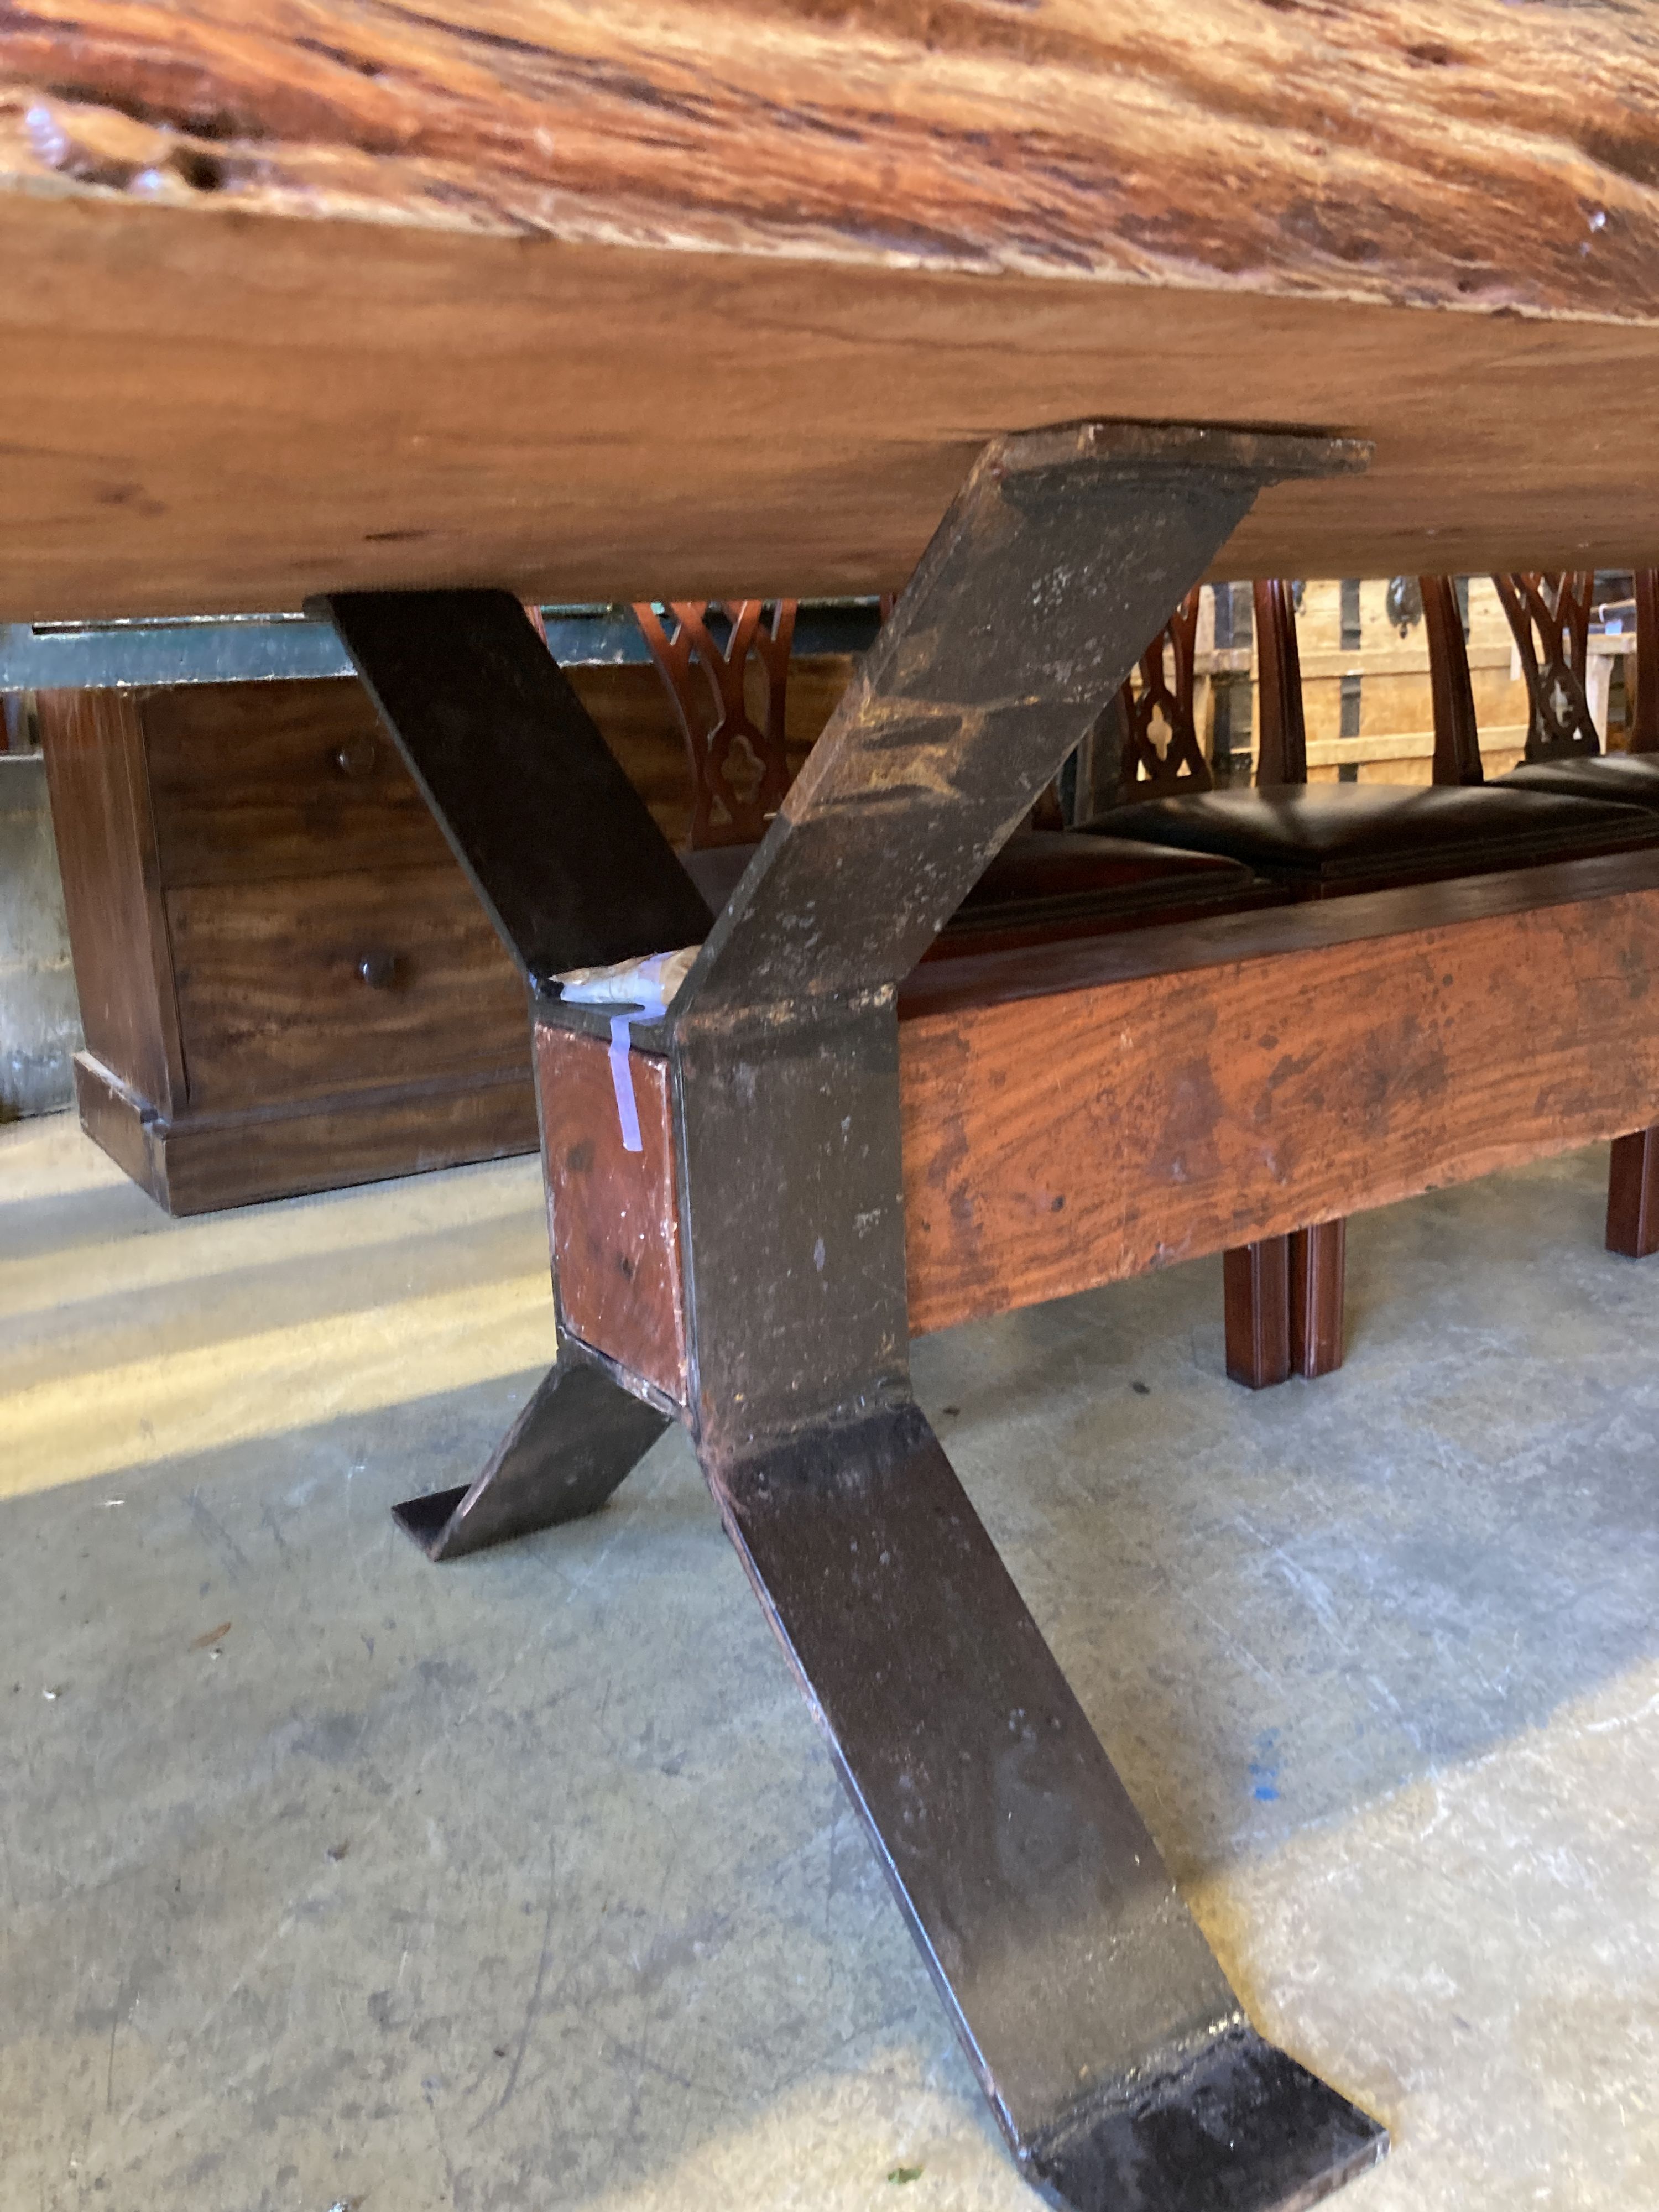 A South African Camelthorn hardwood dining table with a metal x-frame base, length 256cm, width 116cm, height 78cm